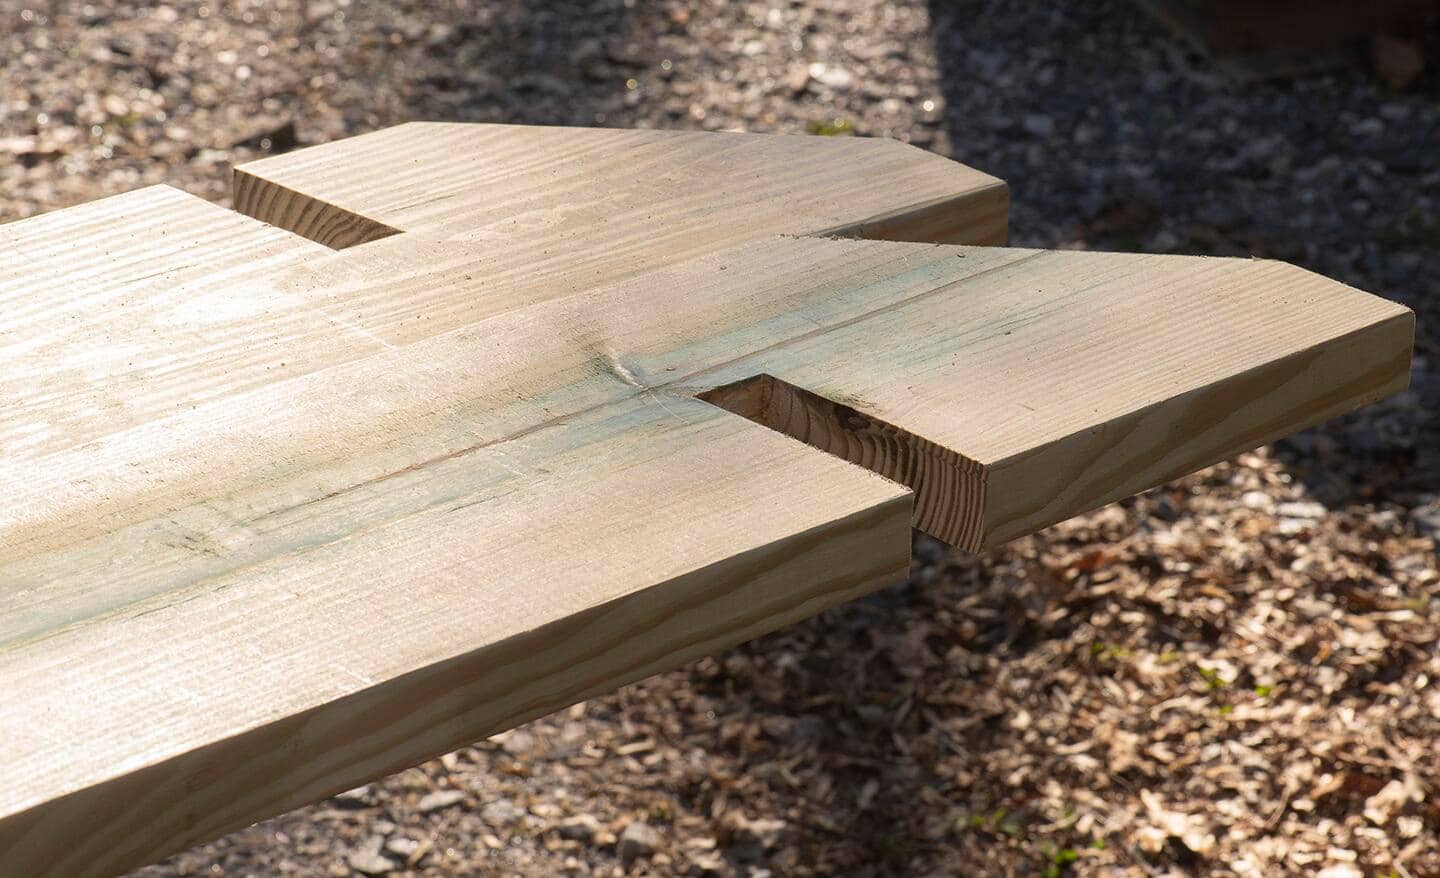 Two 2x10 boards with notches and angles, showing how they should be oriented for building the pergola.